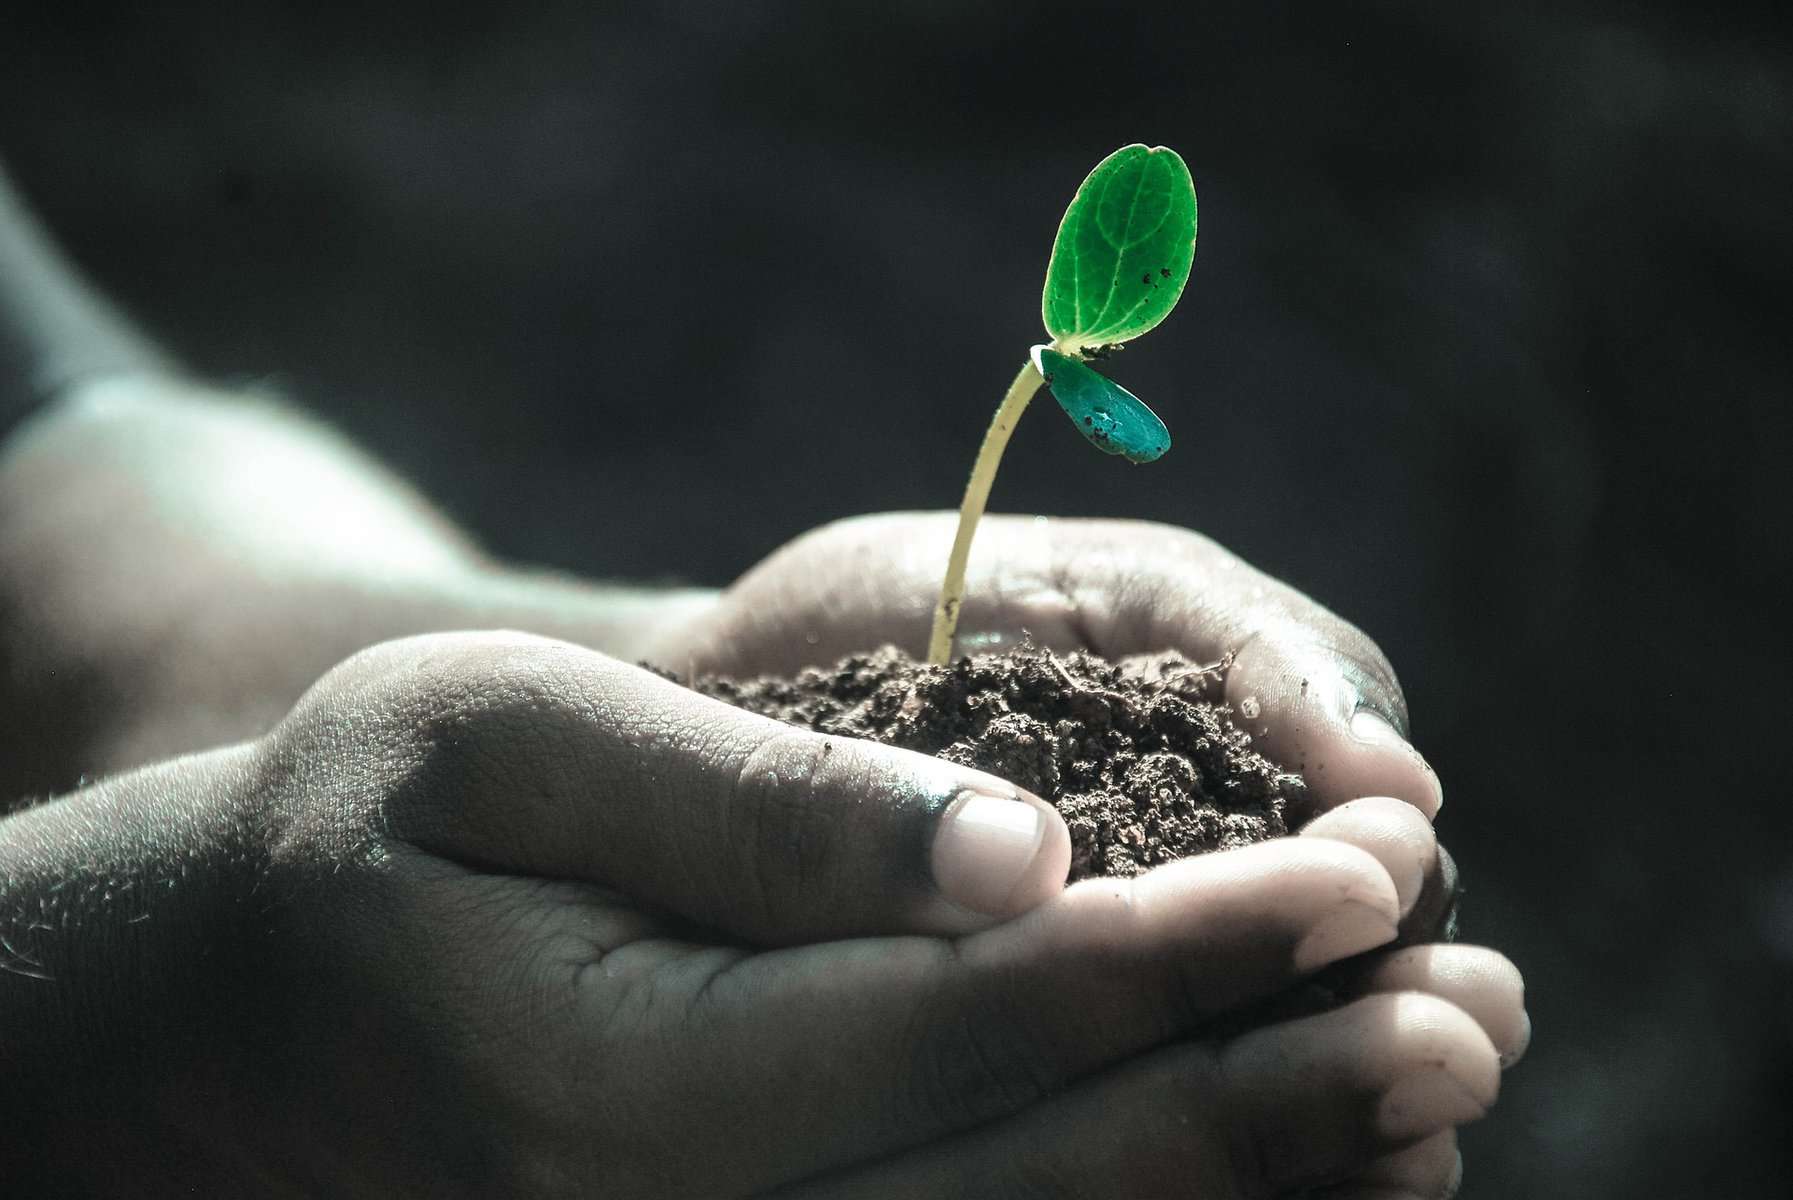 The hands of a dark skinned person hold dirt with a small seedling sticking out of it.